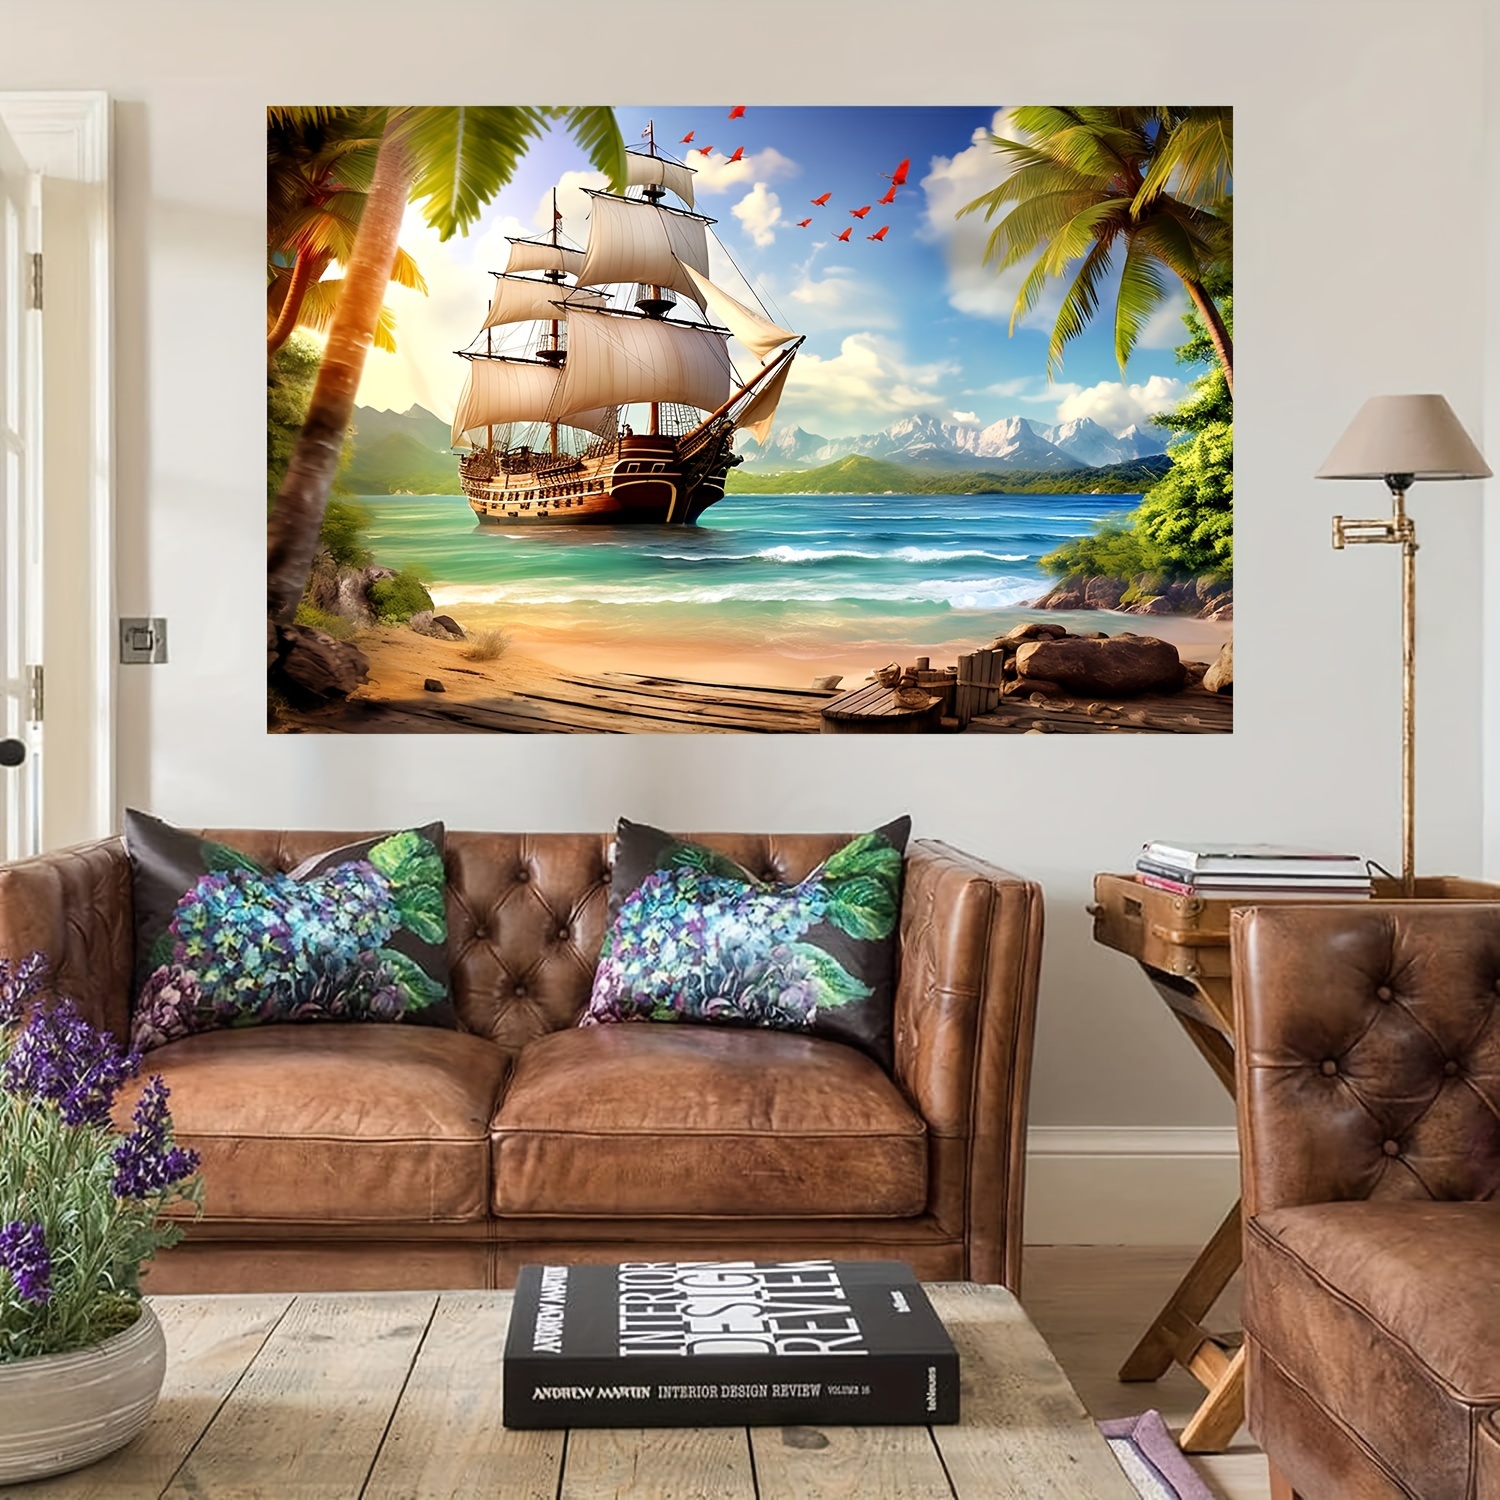 1pc Beach Island Pirate Ship Background Photo Props, Polyester Banner  Decor, Party Home Decor, Party Wall Decor, Birthday Party Background Decor